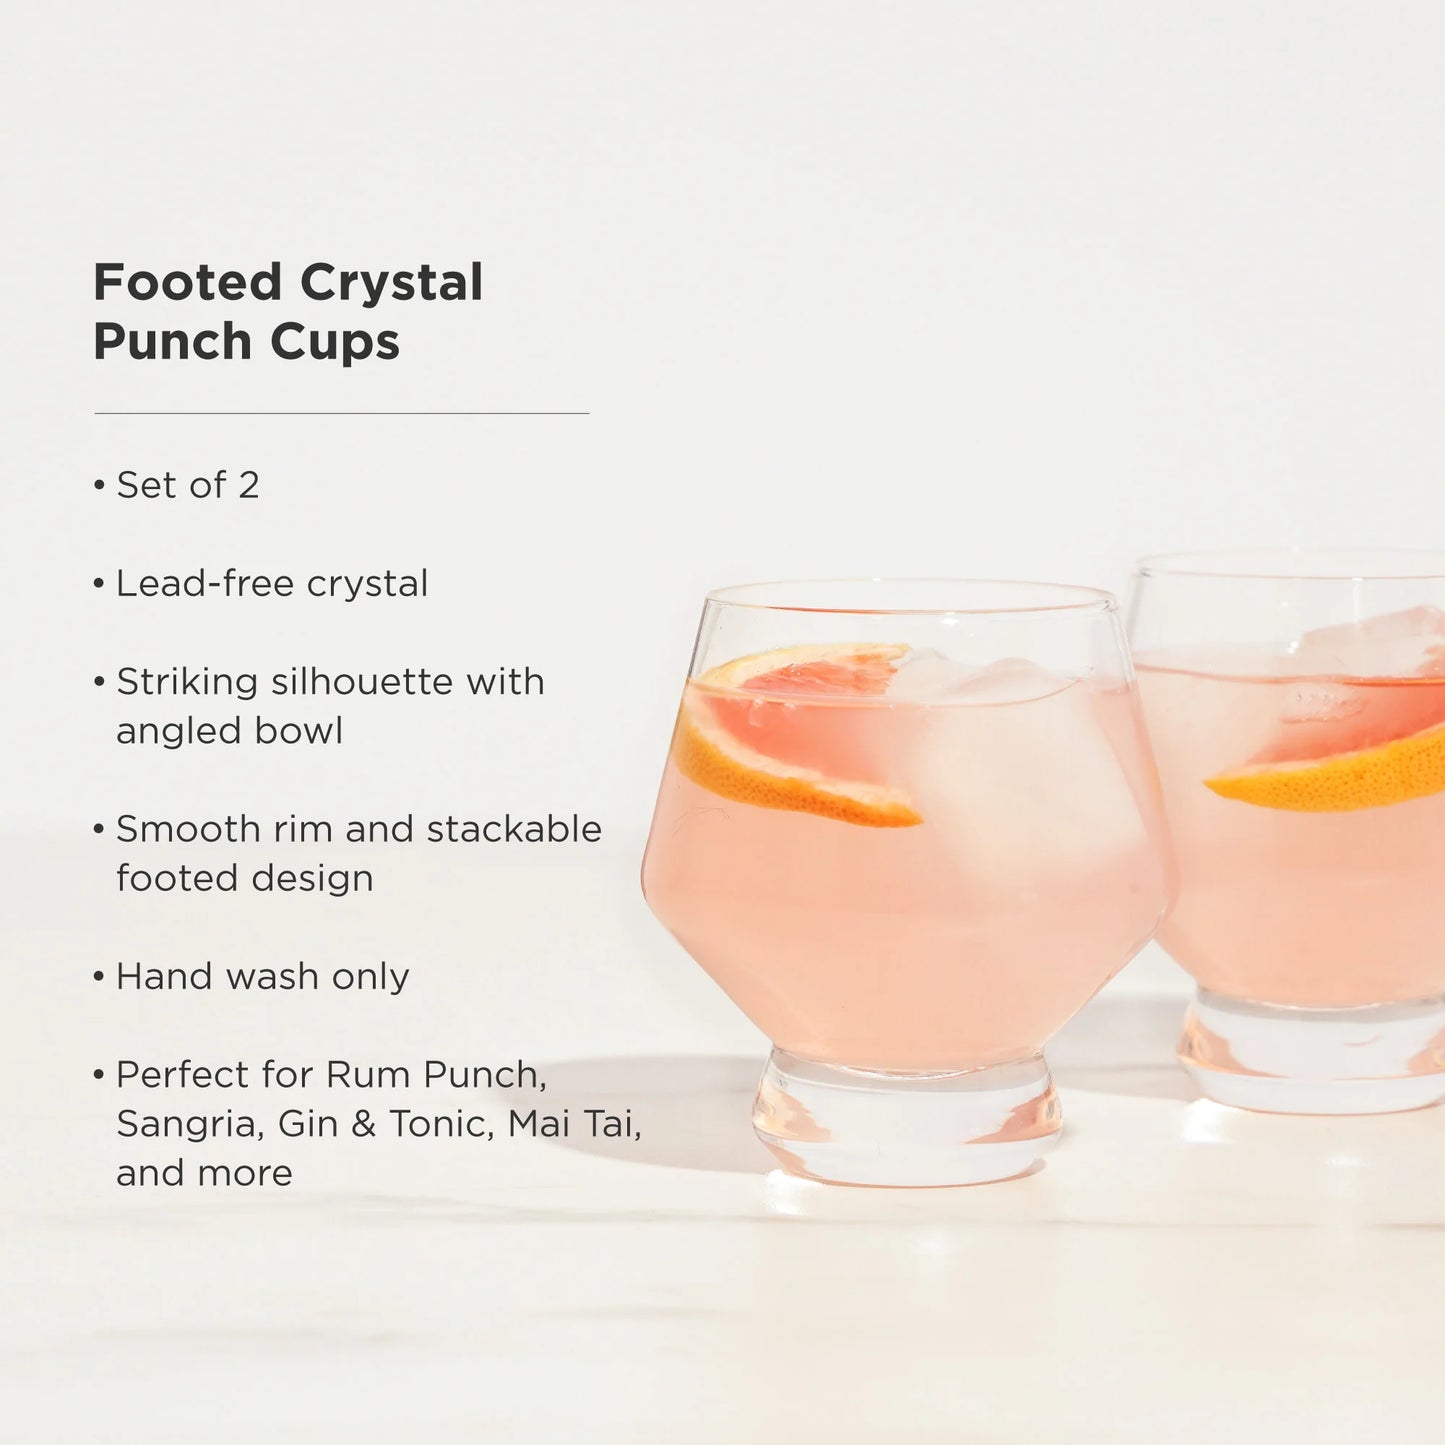 Footed Crystal Punch Cups